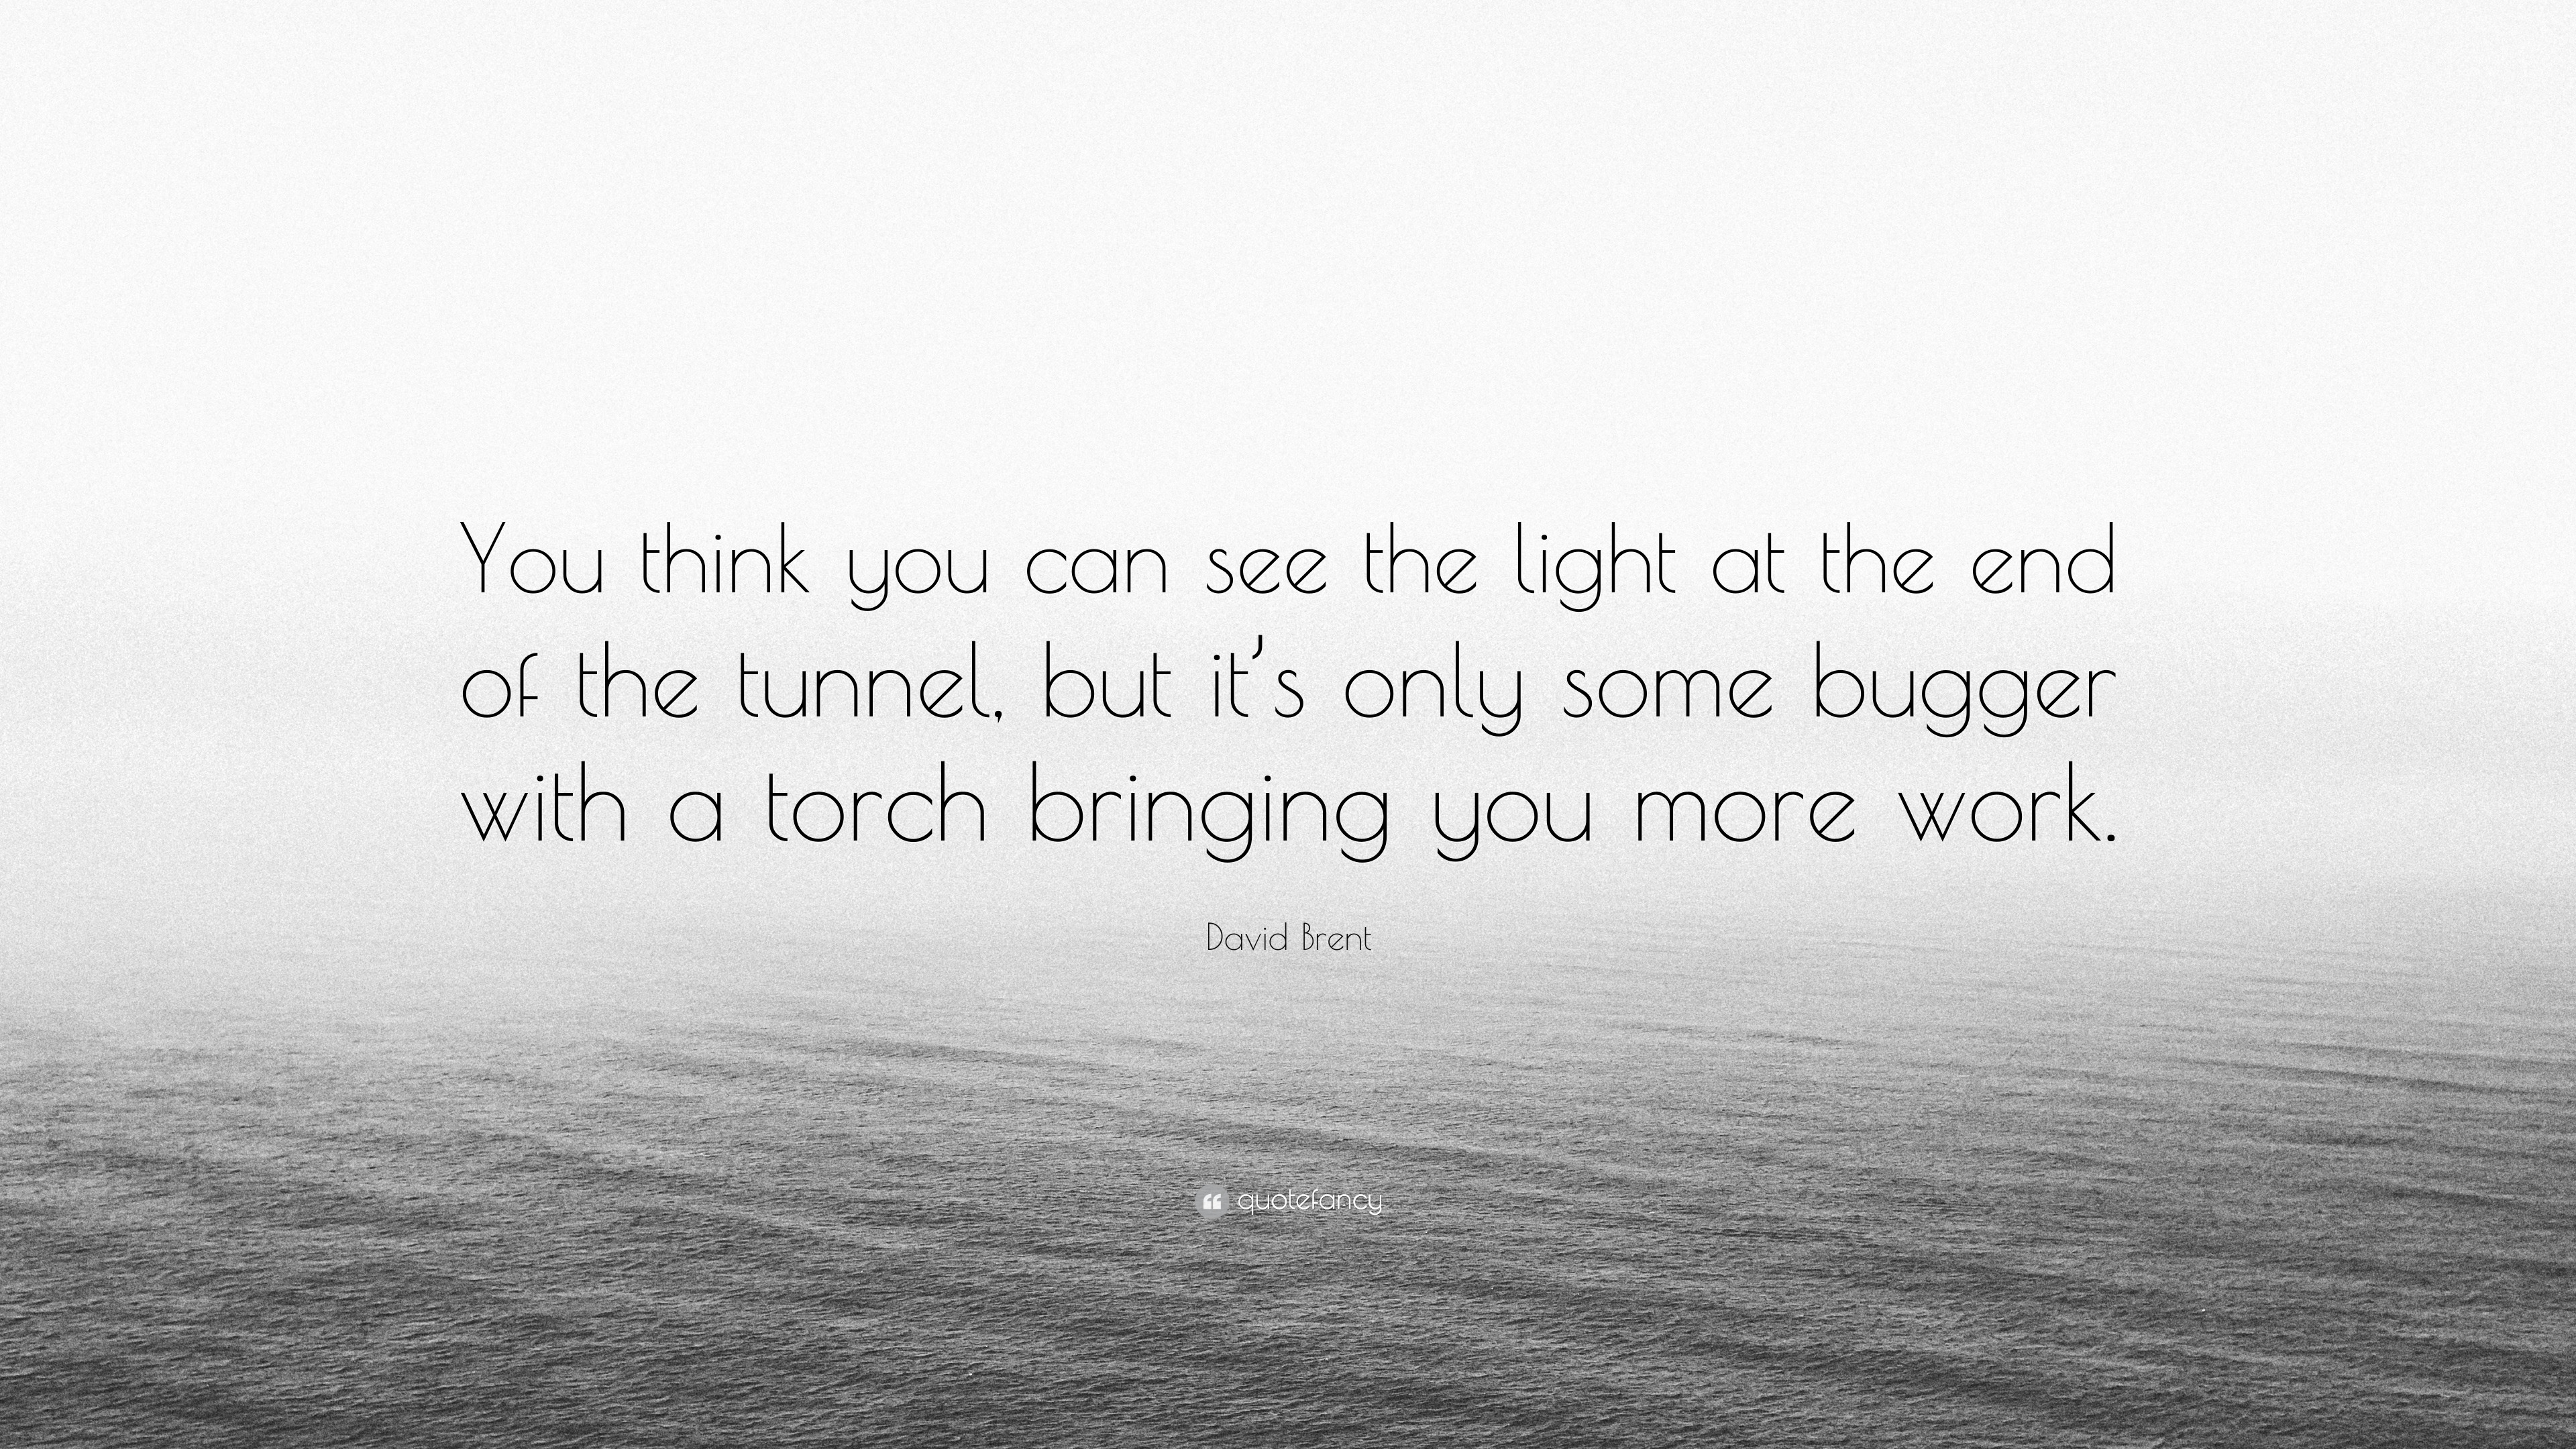 https://quotefancy.com/media/wallpaper/3840x2160/7749106-David-Brent-Quote-You-think-you-can-see-the-light-at-the-end-of.jpg